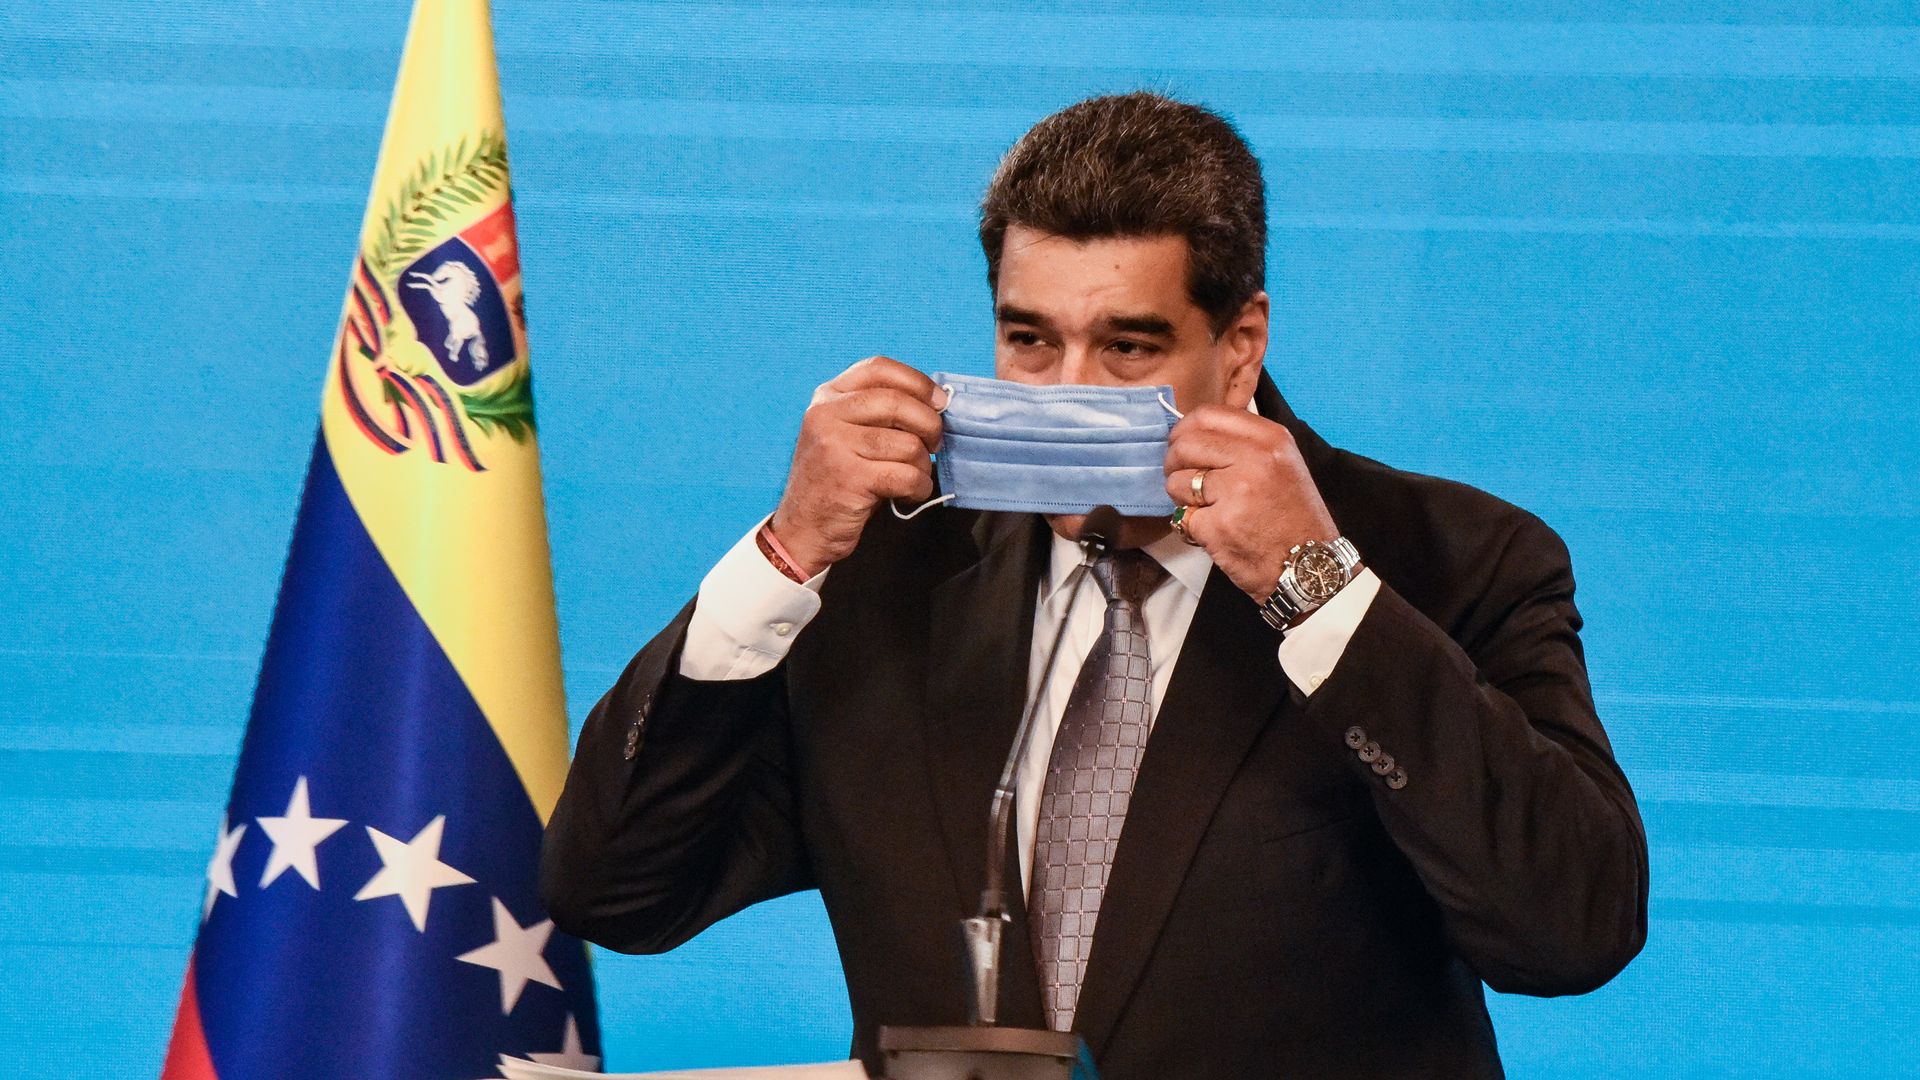 Nicolas Maduro President of Venezuela puts on his protective facemask after he gave a press conference in Miraflores Palace on February 17, 2021 in Caracas, Venezuela.